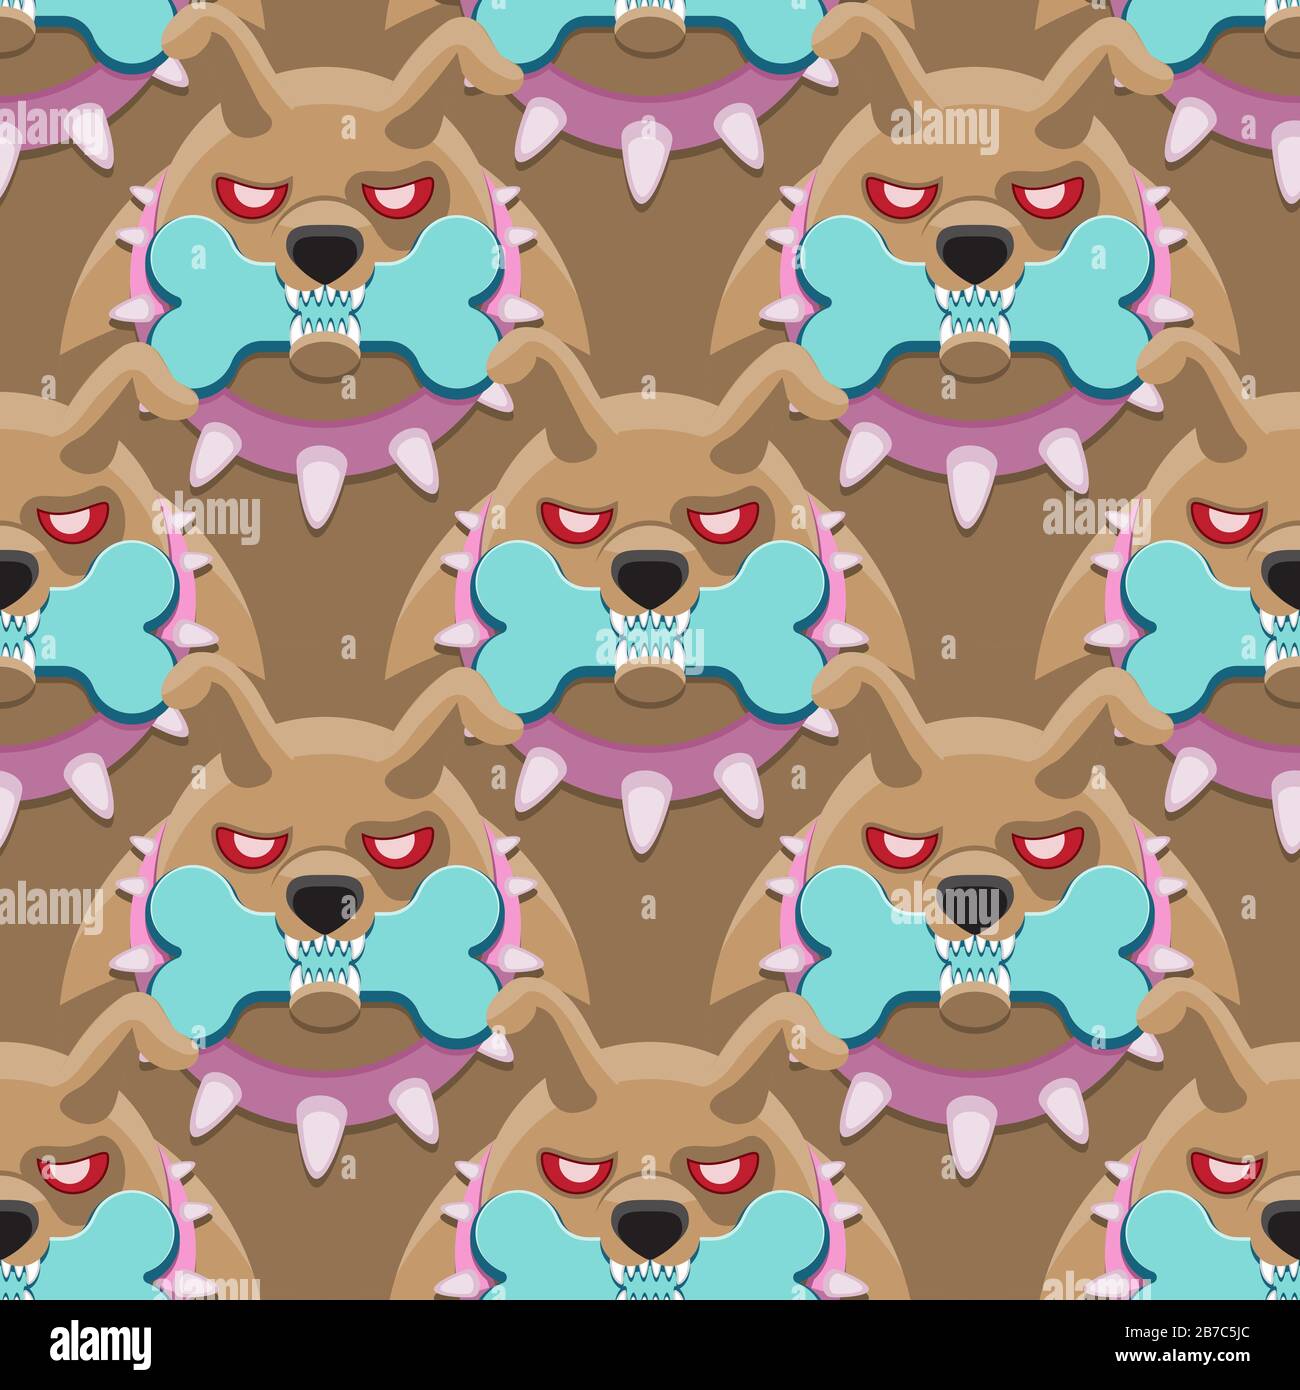 Seamless pattern of an angry dog holding a bone in its teeth on a brown background. Vector image Stock Vector